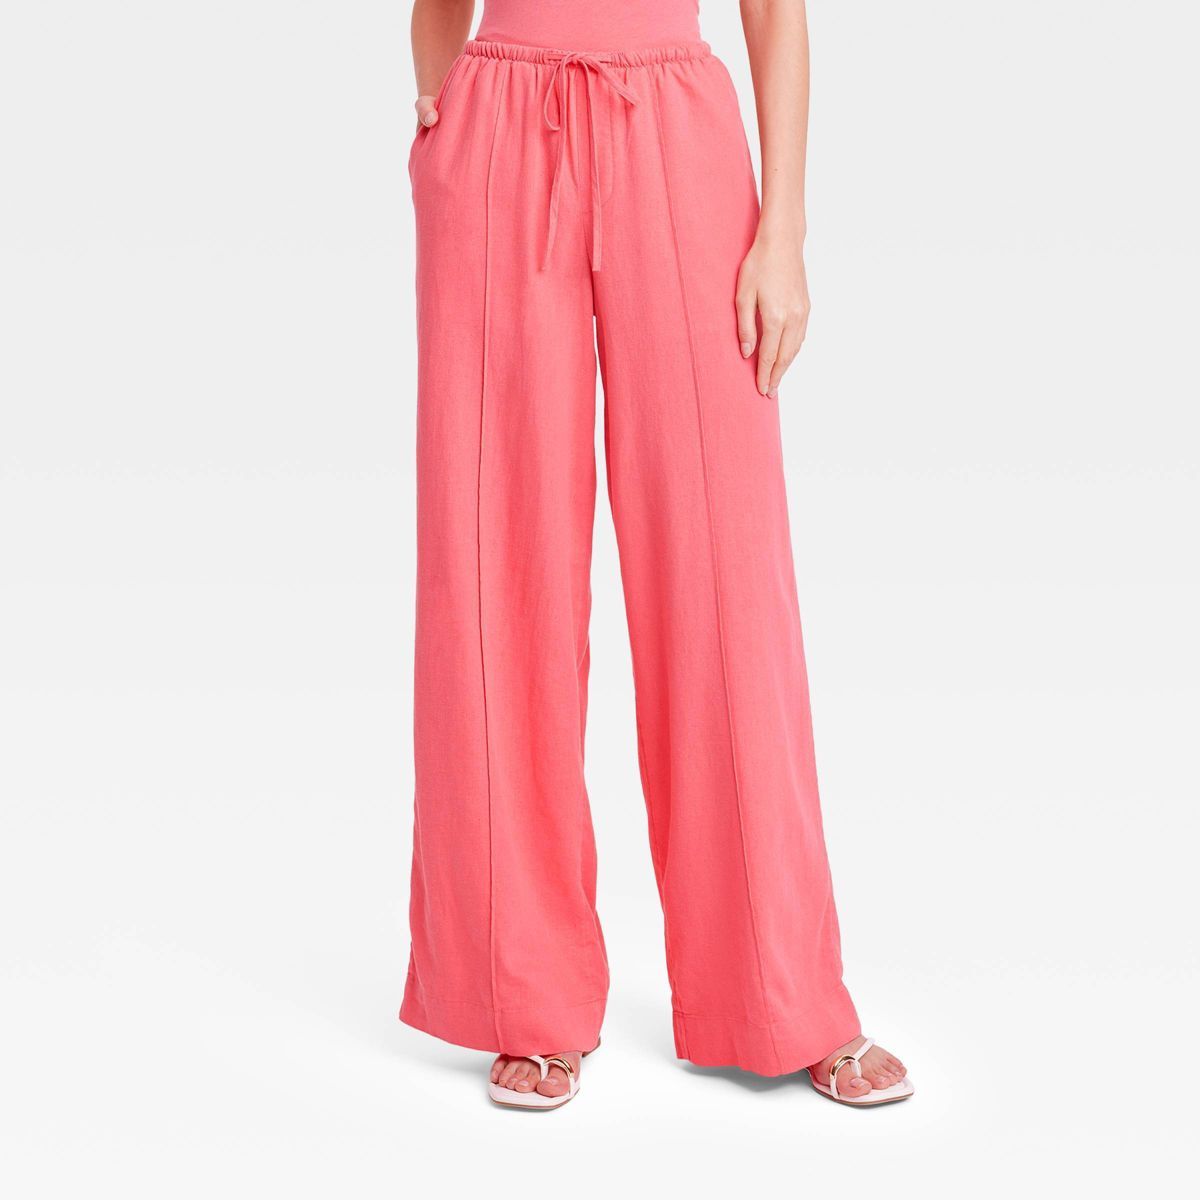 Women's High-Rise Wide Leg Linen Pull-On Pants - A New Day™ Pink S | Target